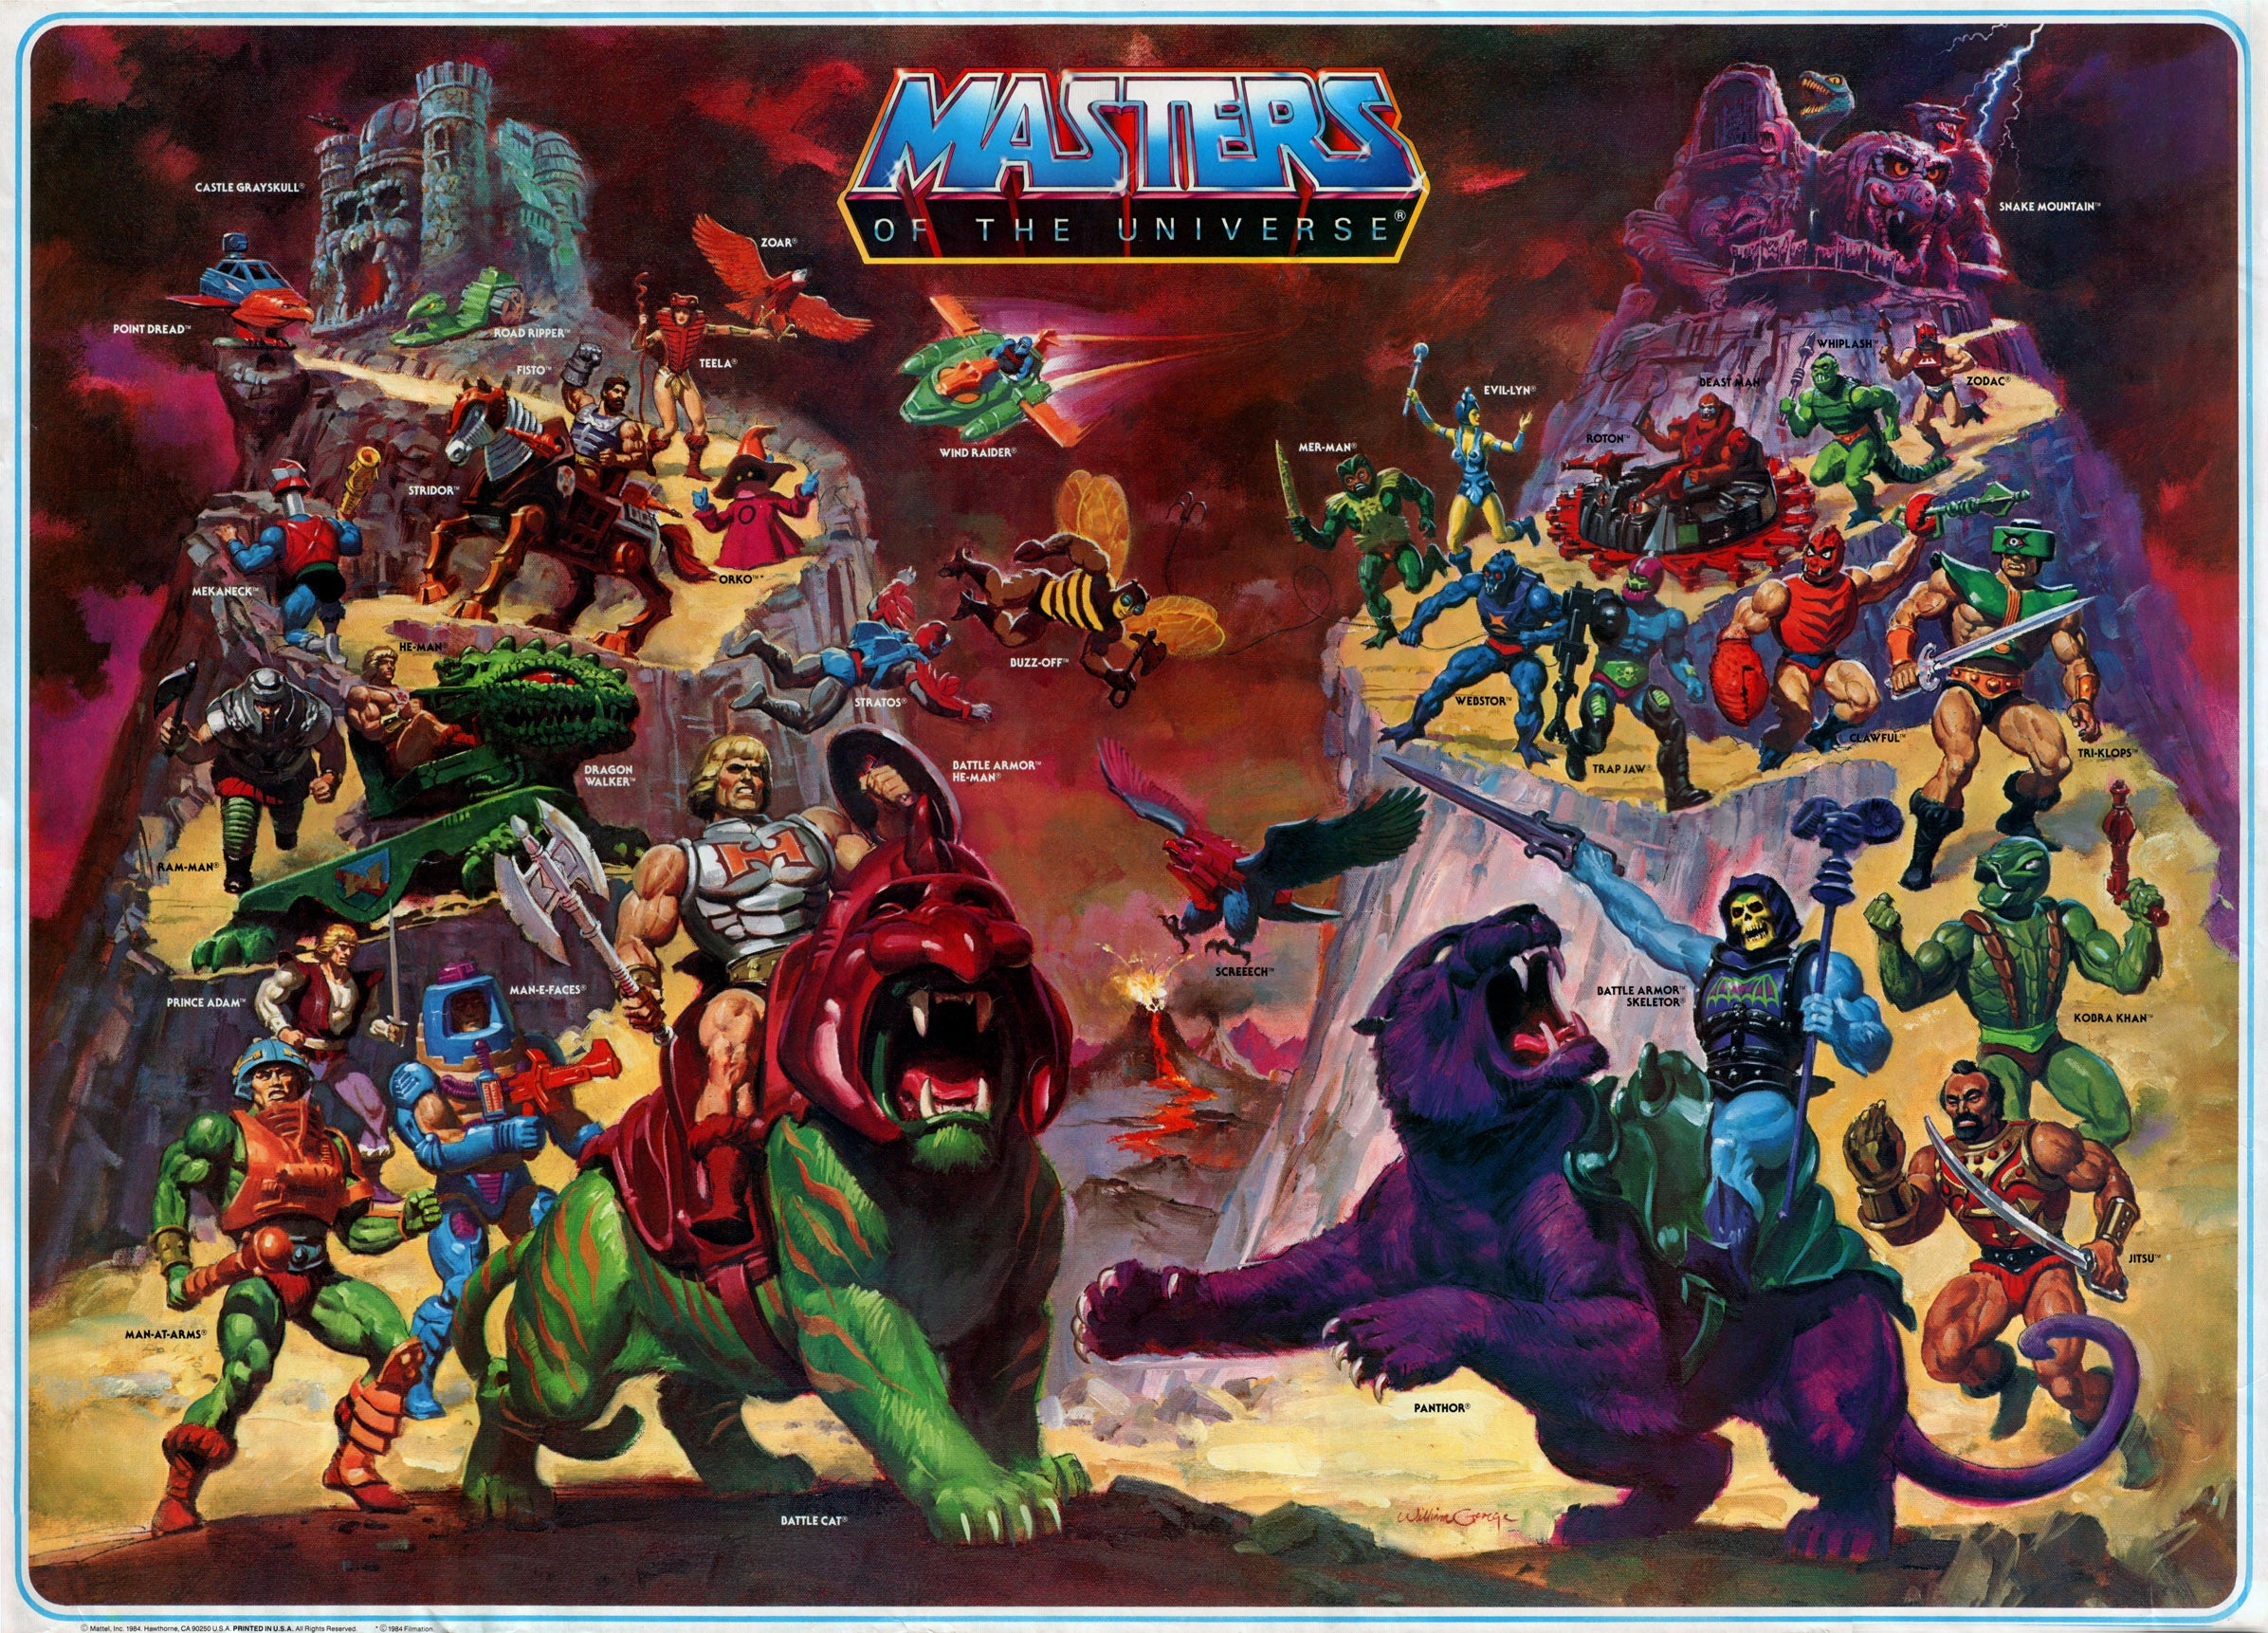 A classic poster from the 1980s Masters of the Universe toyline showcasing the figures (Image: Mattel)